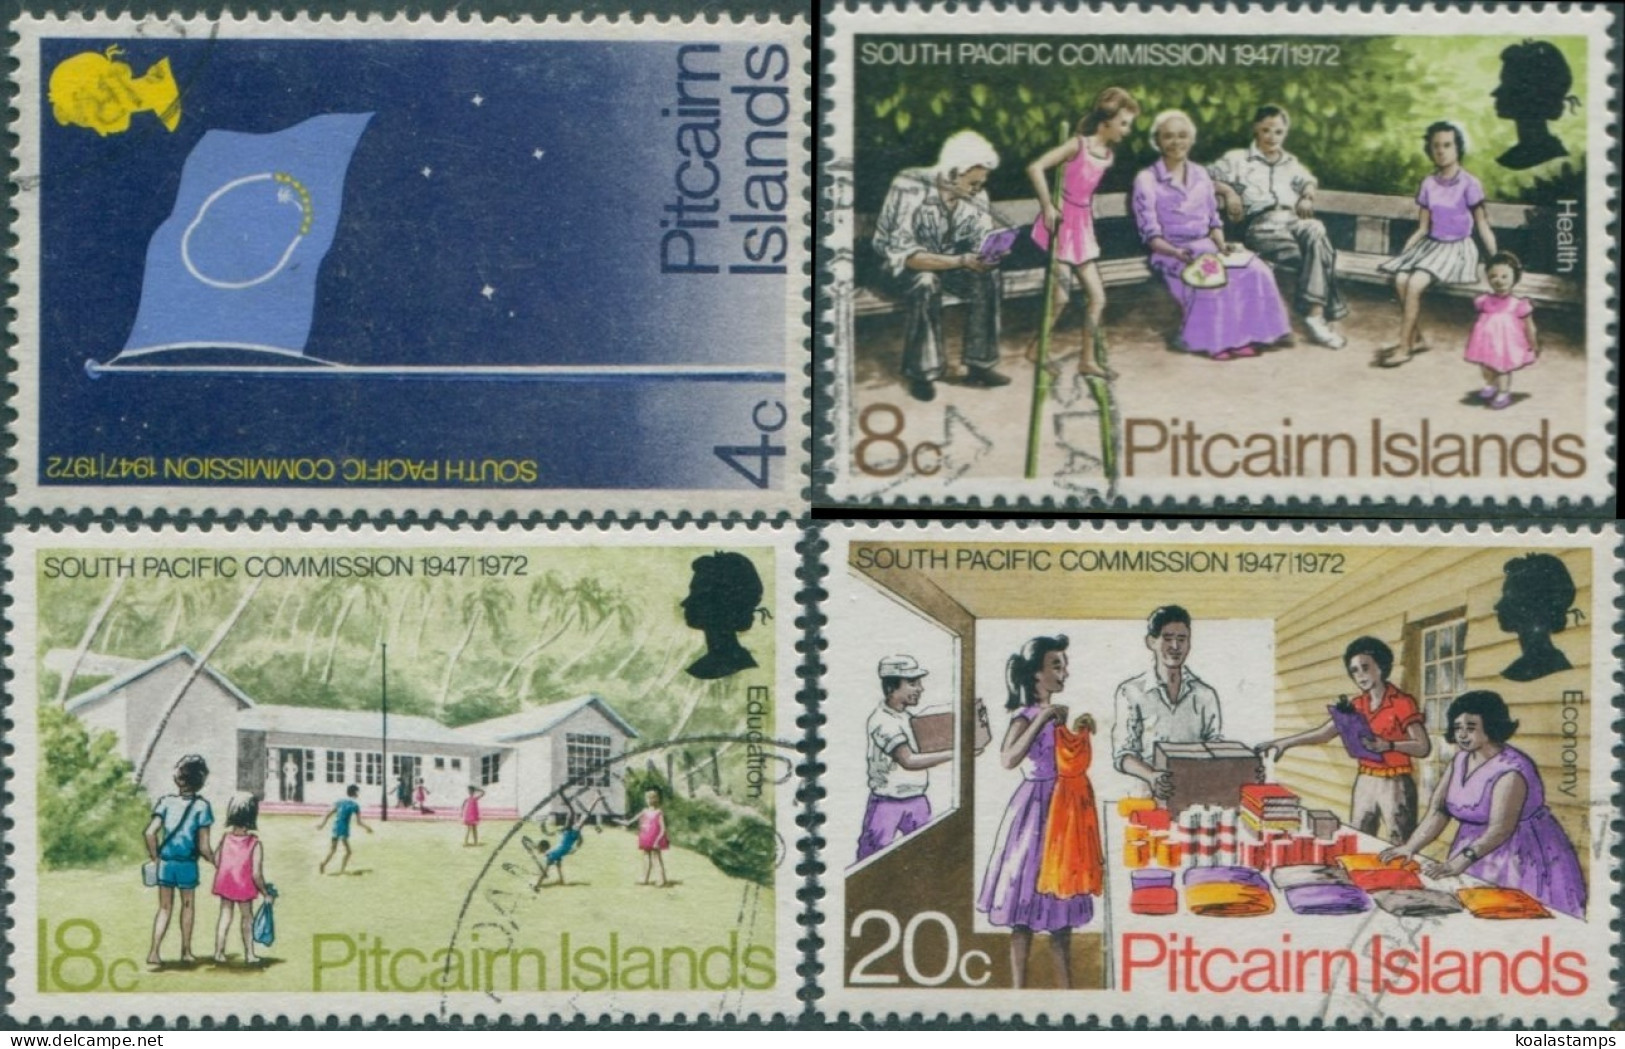 Pitcairn Islands 1972 SG120-123 South Pacific Commission Set FU - Pitcairn Islands